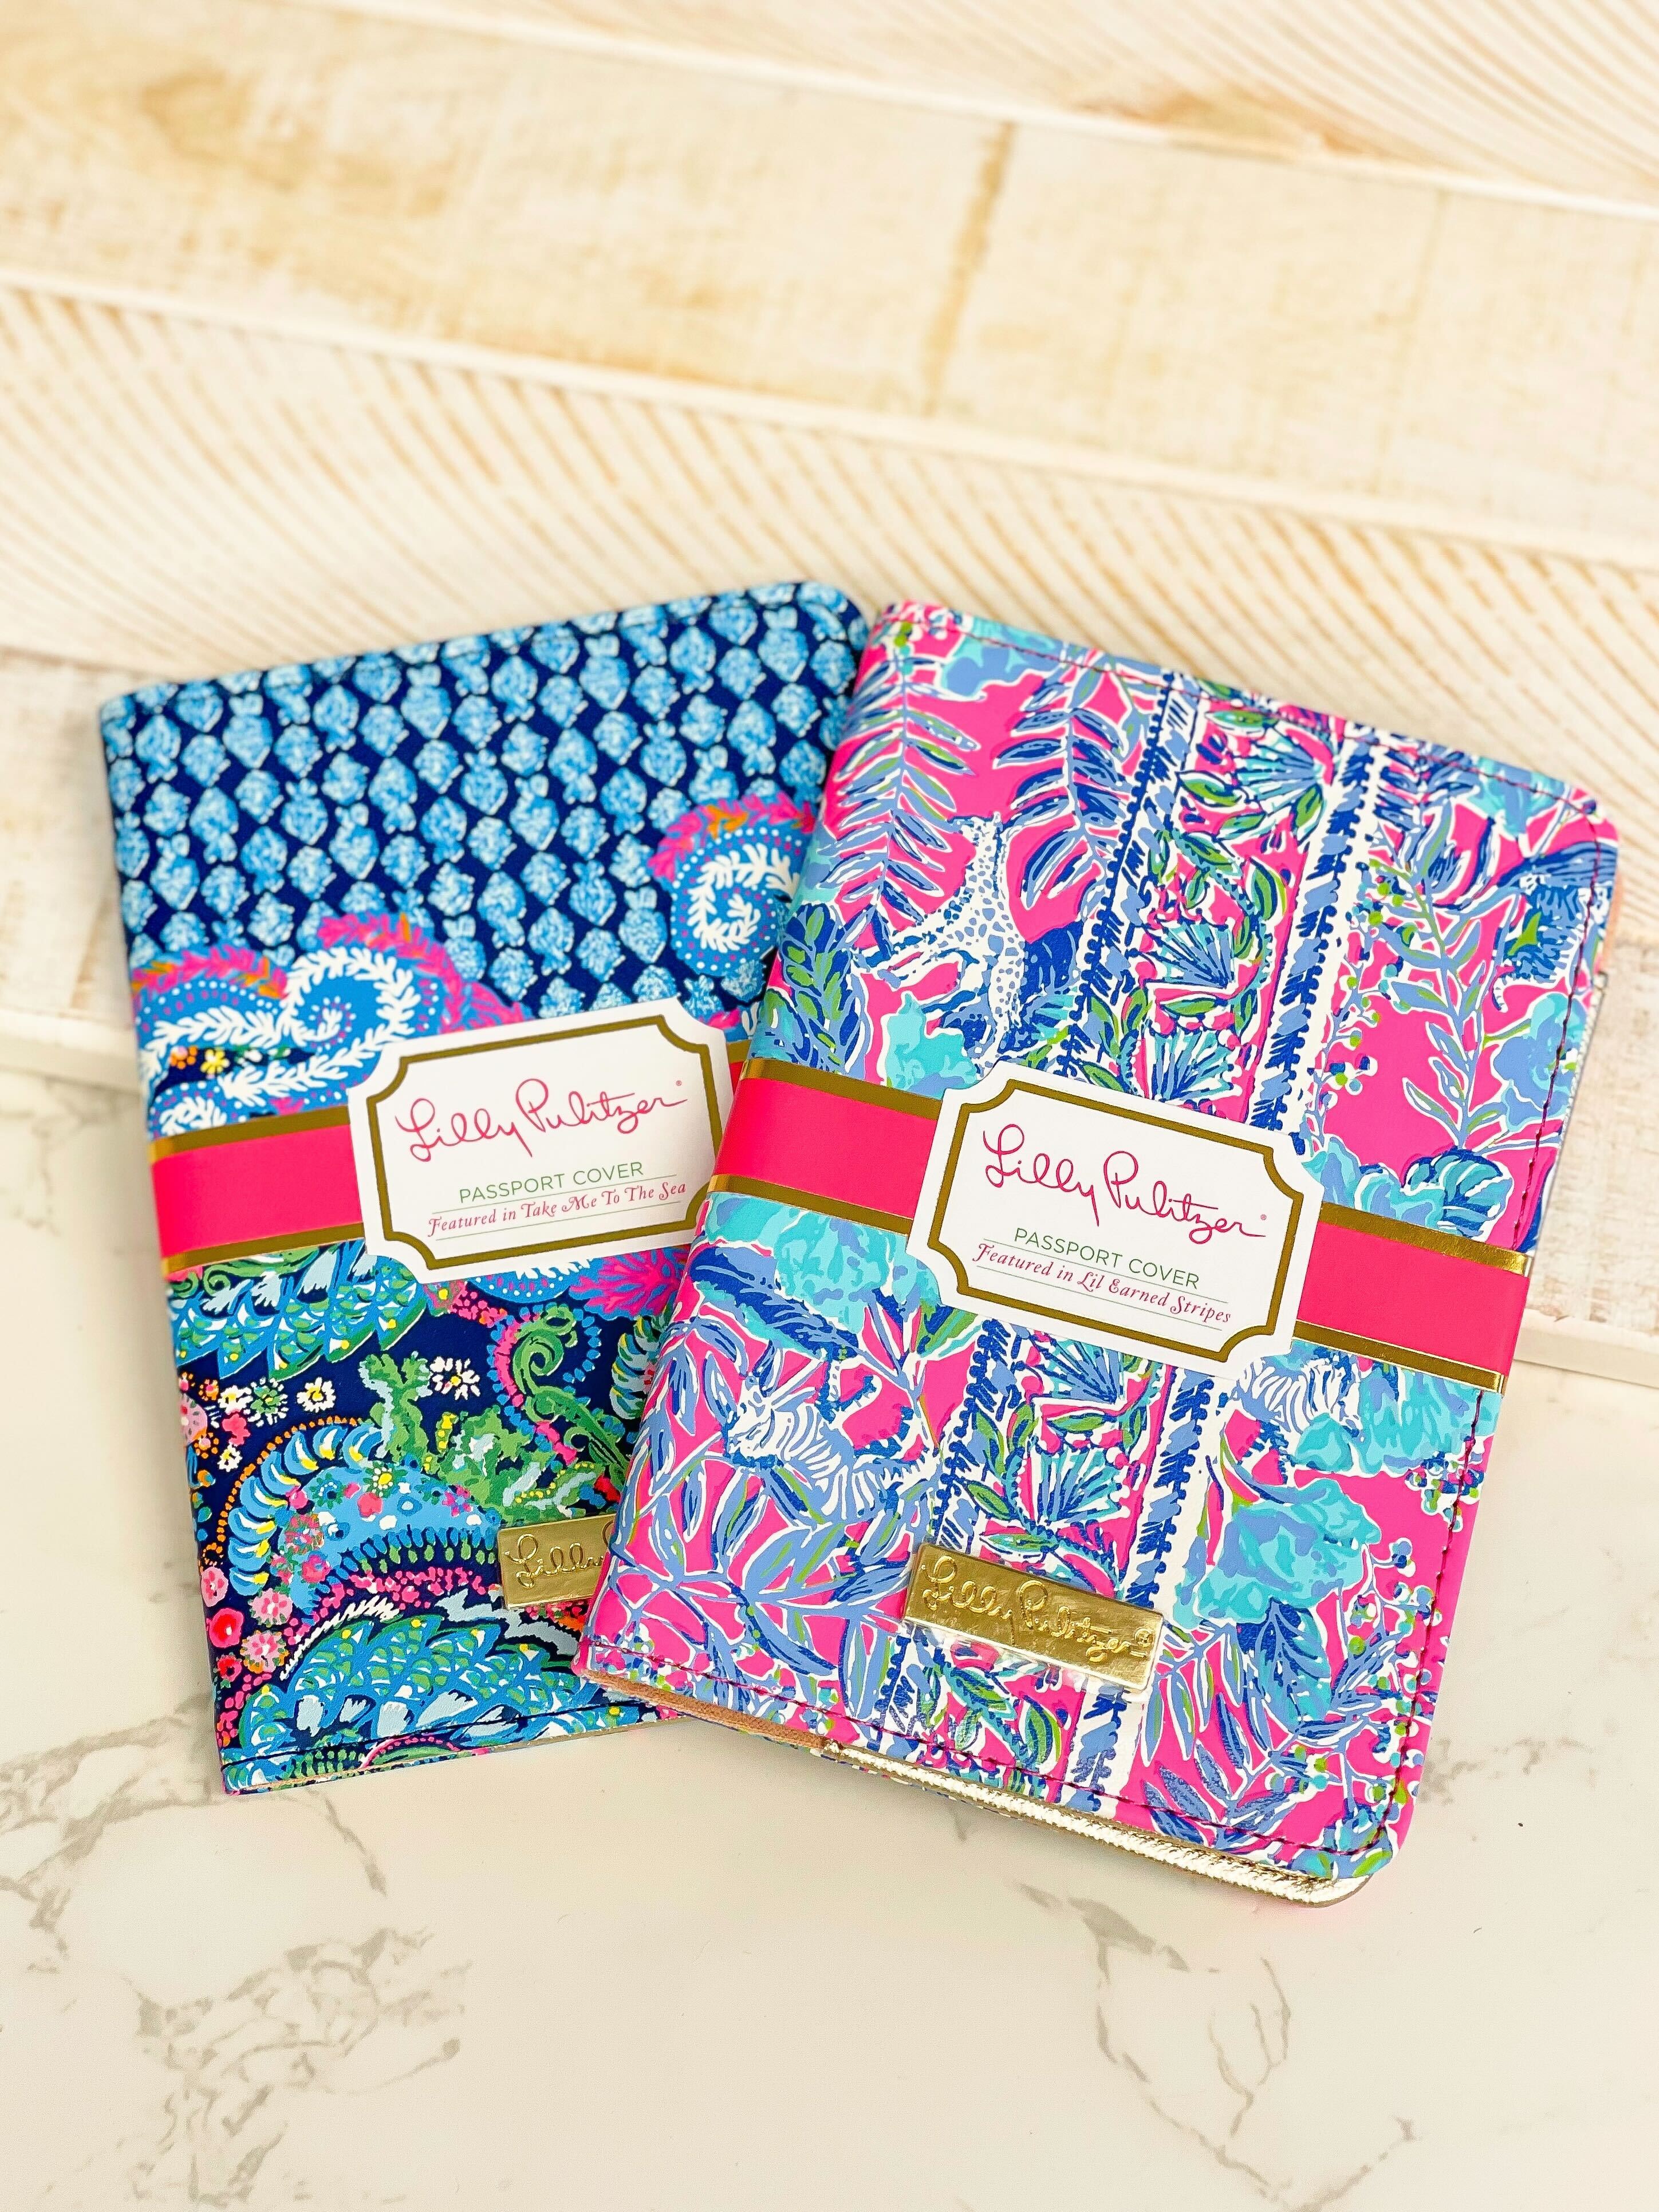 Passport Cover by Lilly Pulitzer - Take Me to the Sea